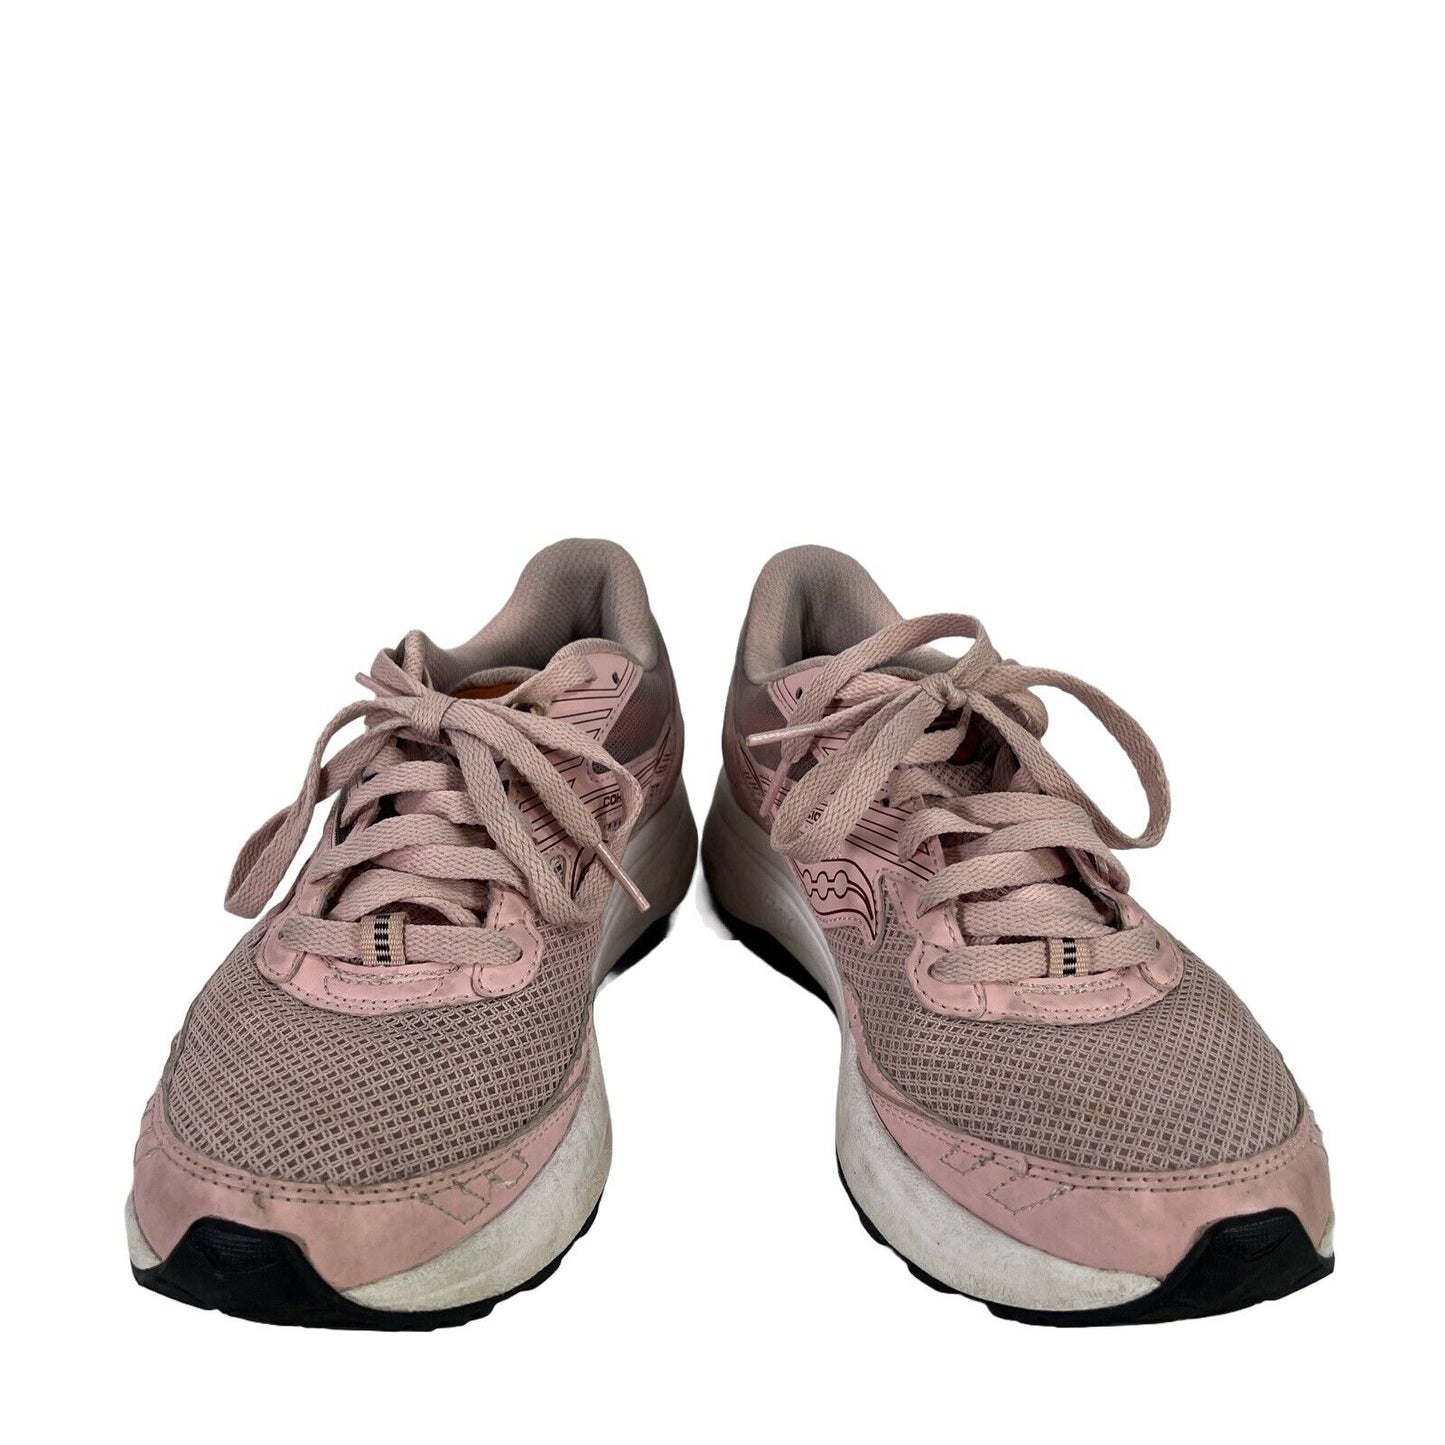 Saucony Women's Pink Lace Up Athletic Shoes - 7